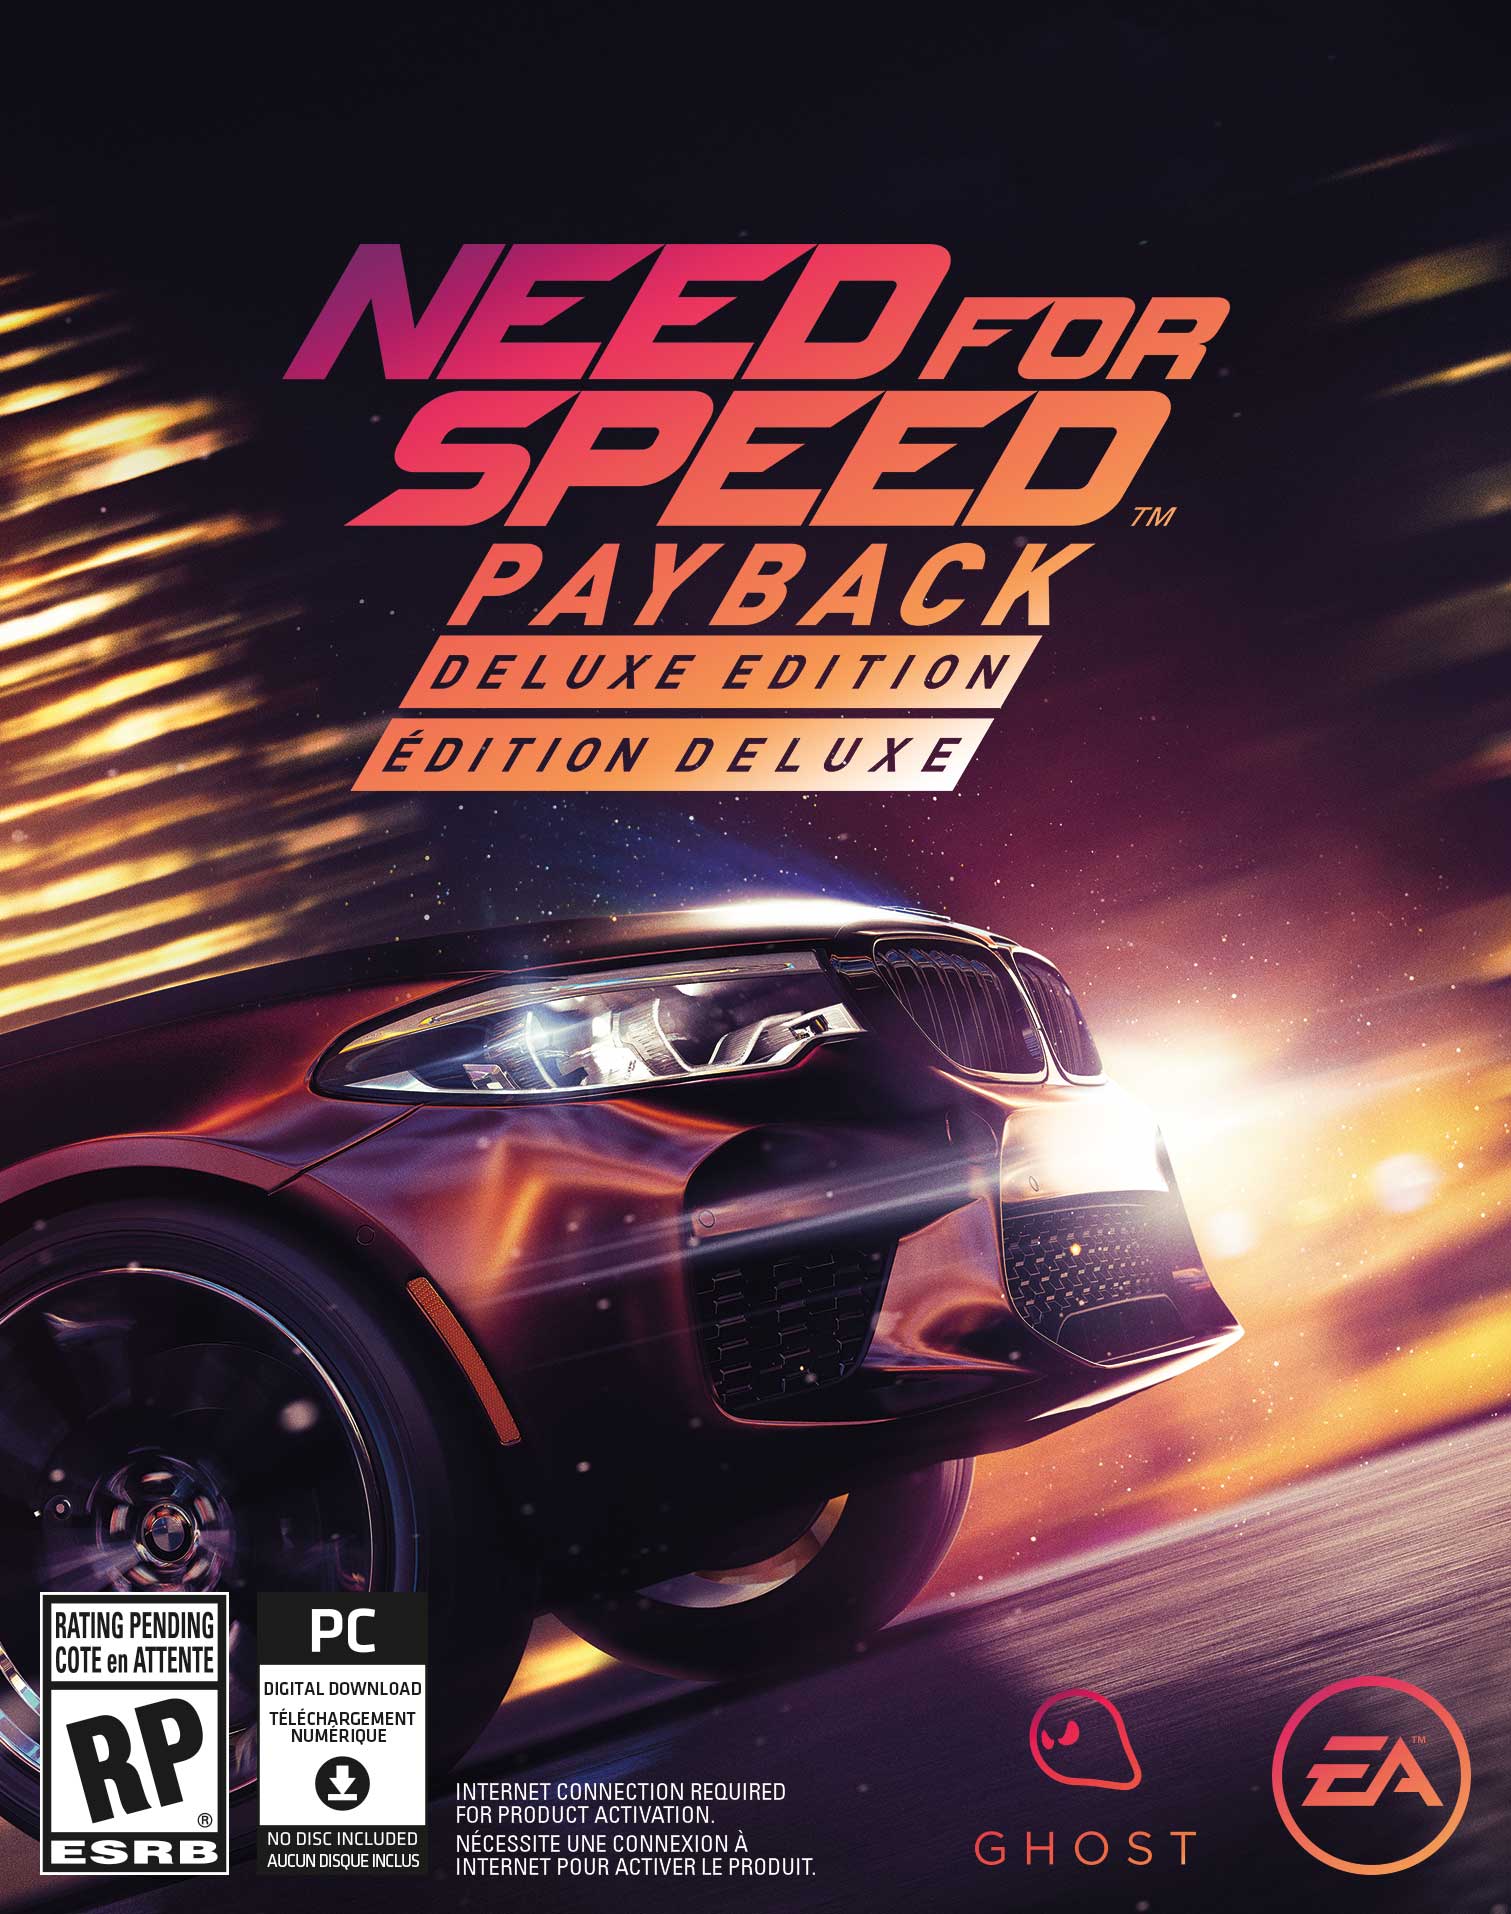 Need For Speed Payback カーレースアクションゲーム Ea公式サイト